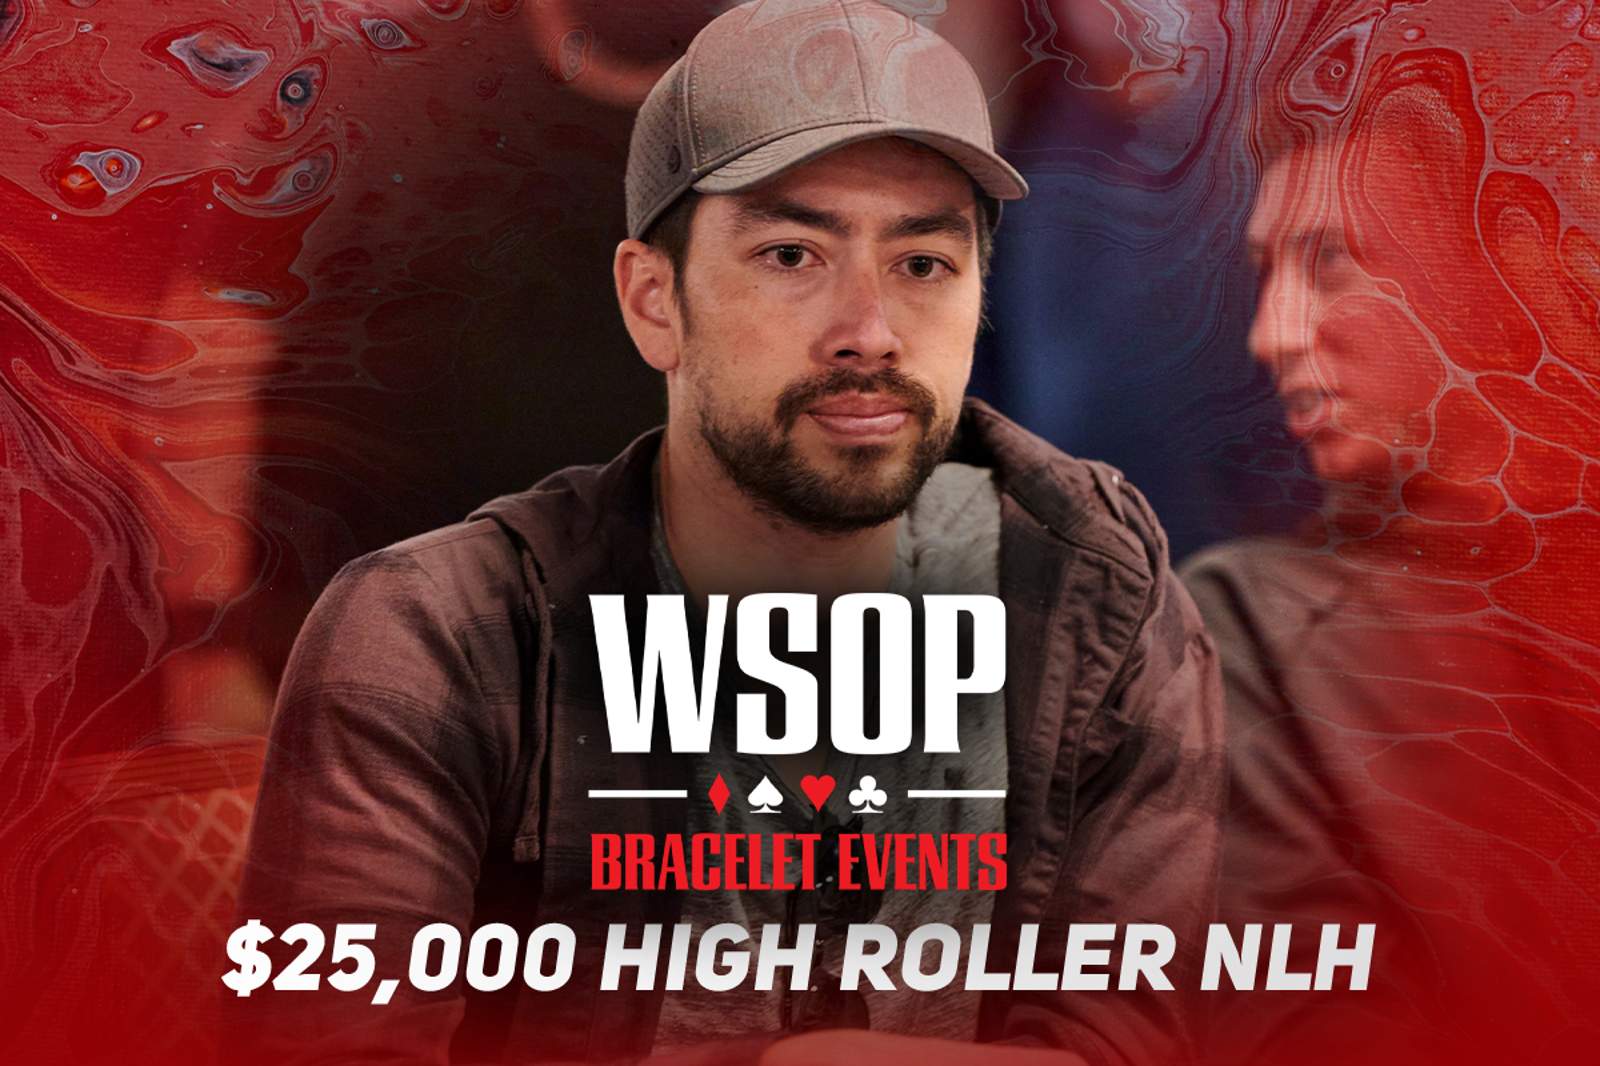 Watch the WSOP Event #6: $25K High Roller Final Table on PokerGO.com at 8 p.m. ET